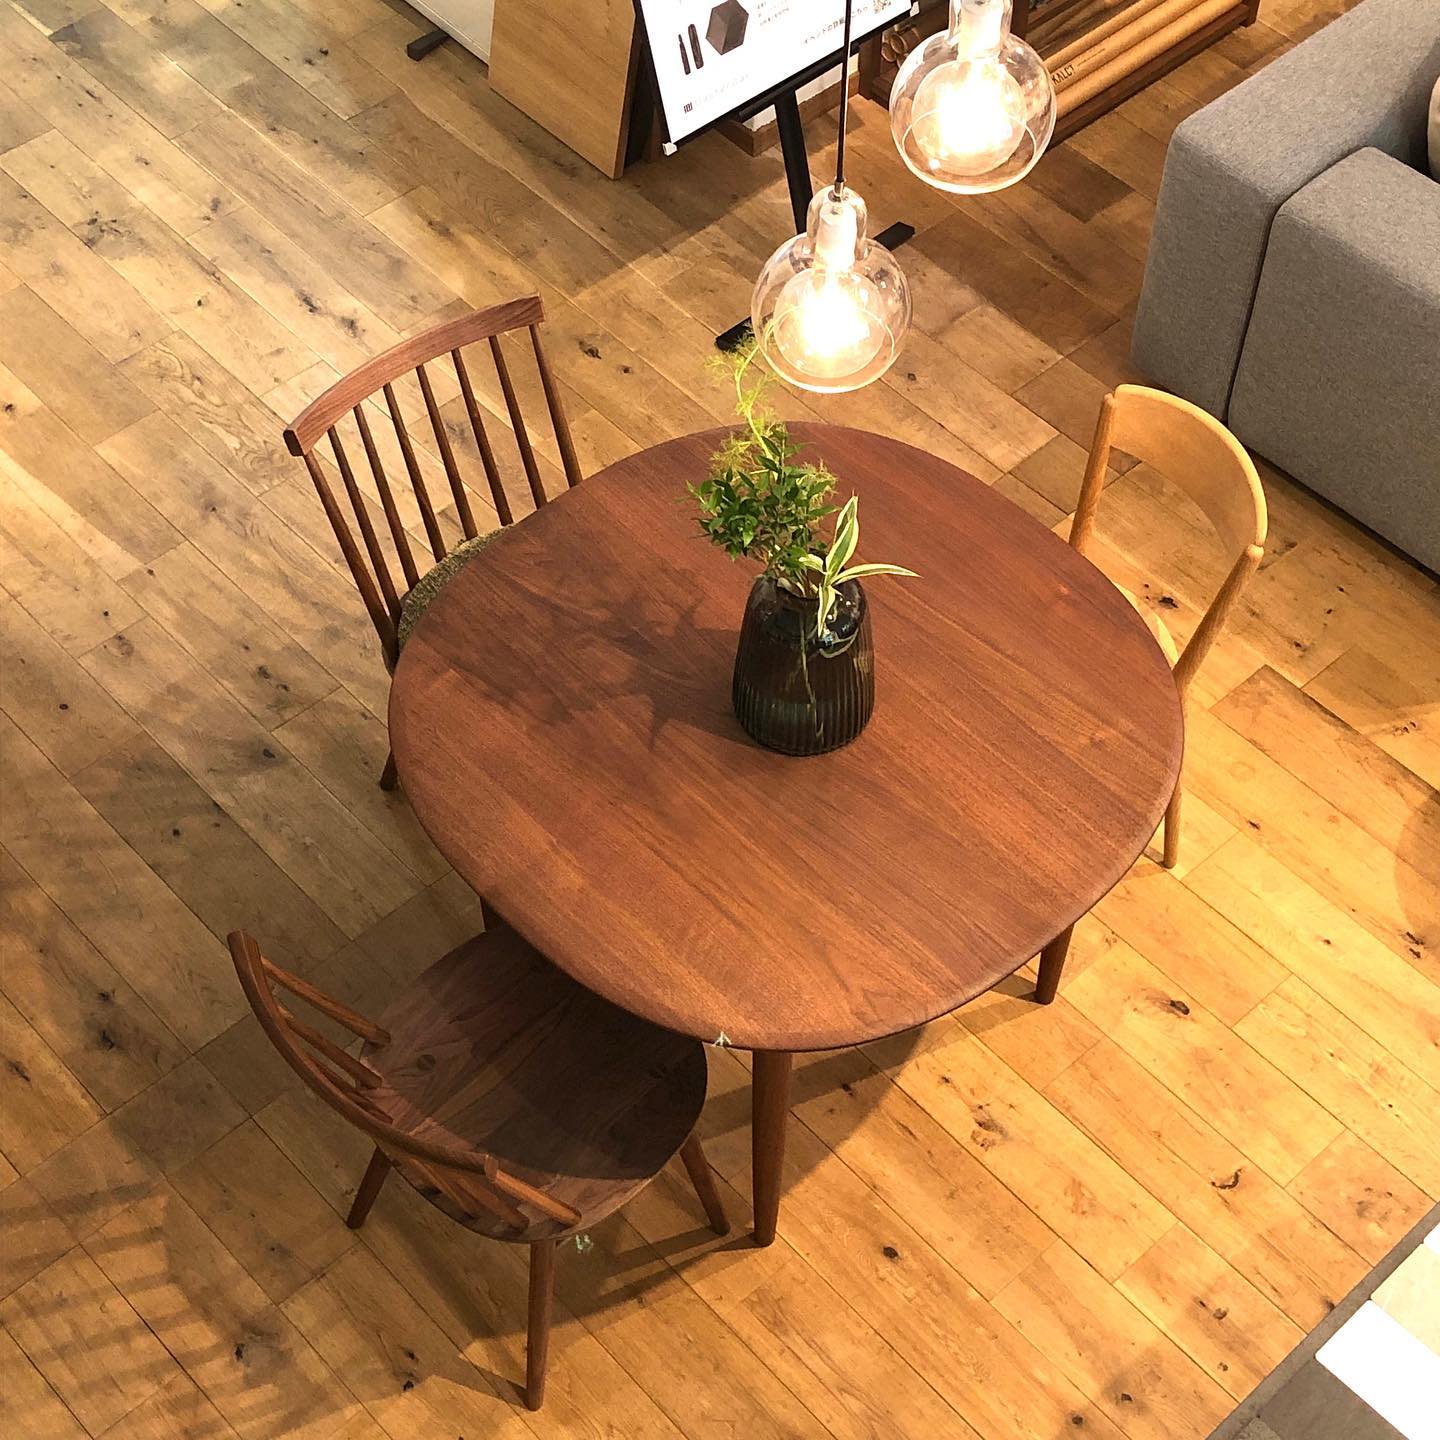 BLUEPRINT N5/2 DINING TABLE (ROUND)